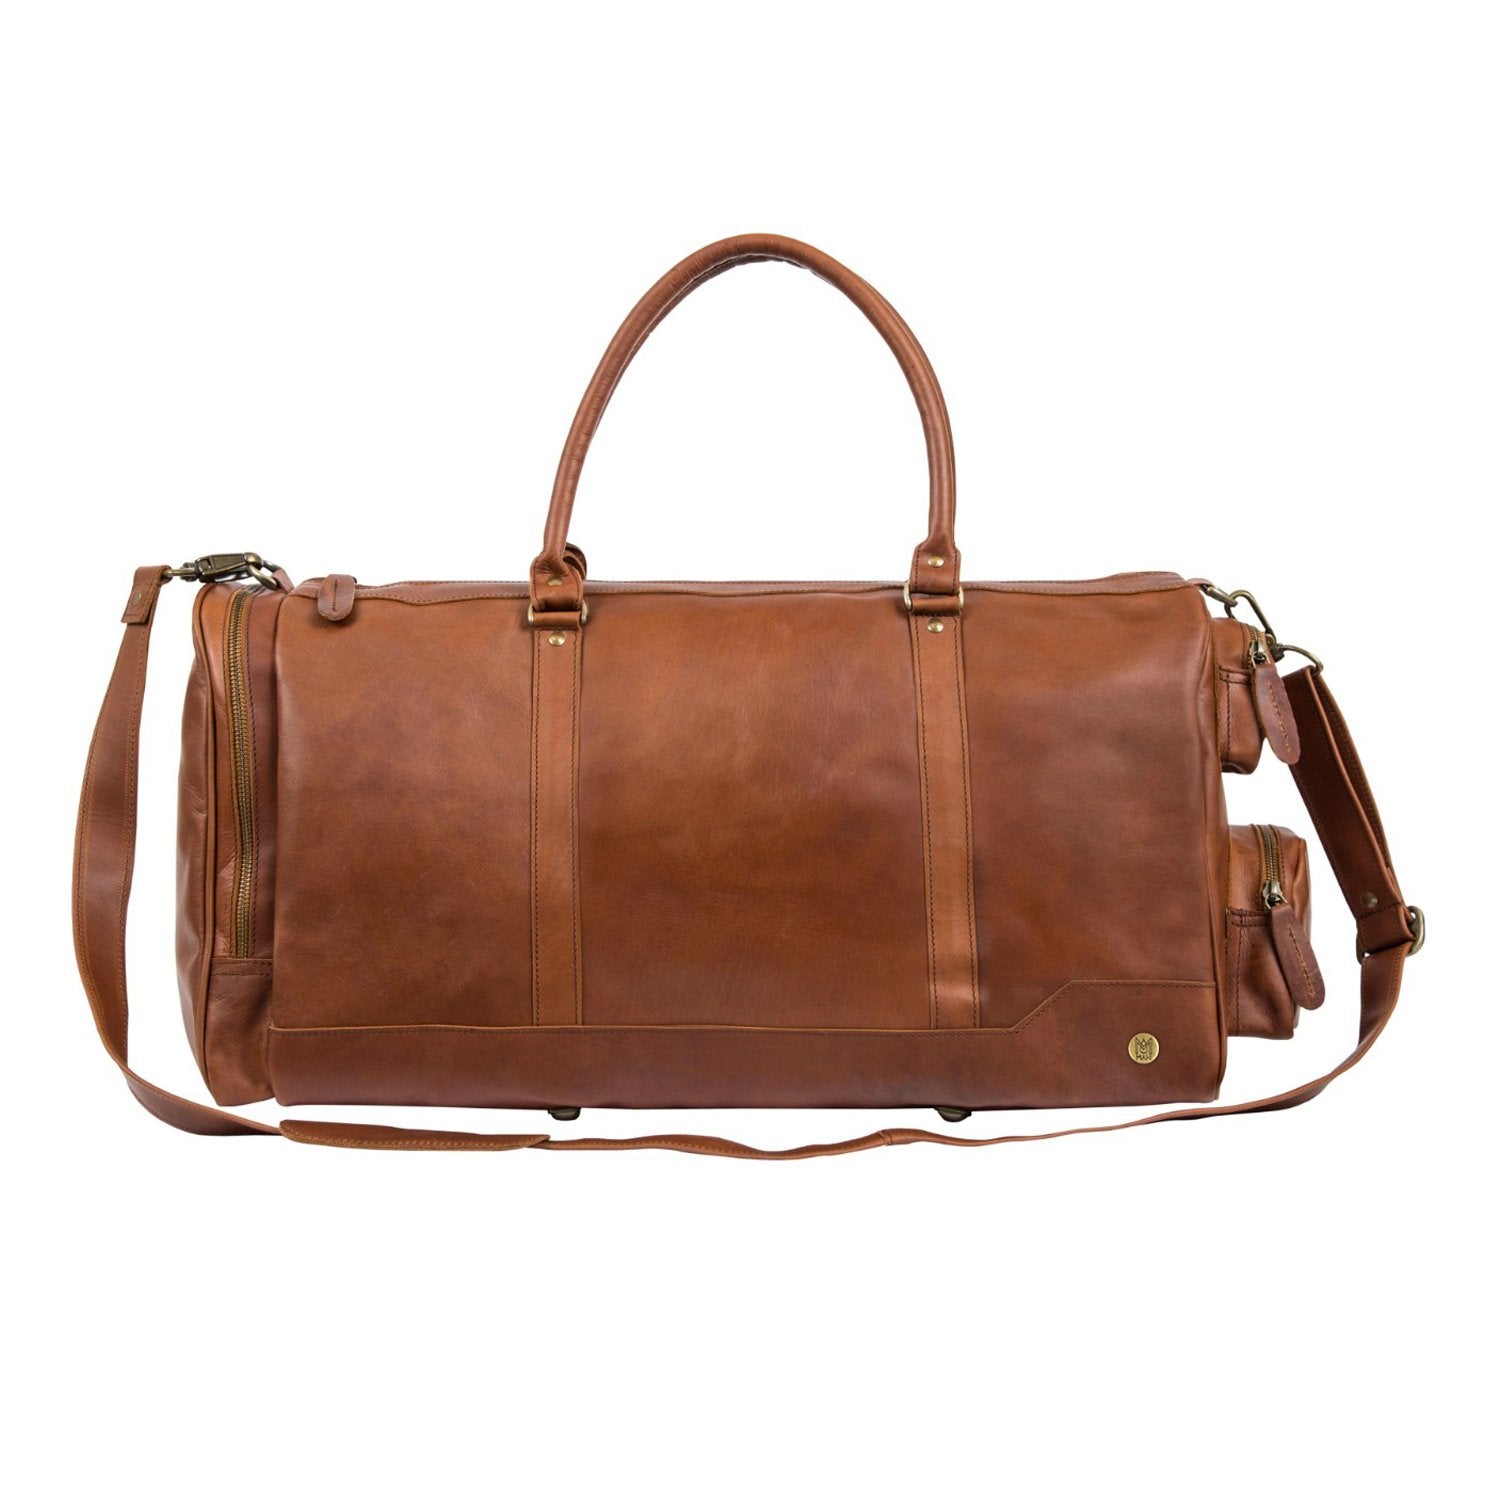 Vegetable-tanned leather -  - The Leather  Dictionary